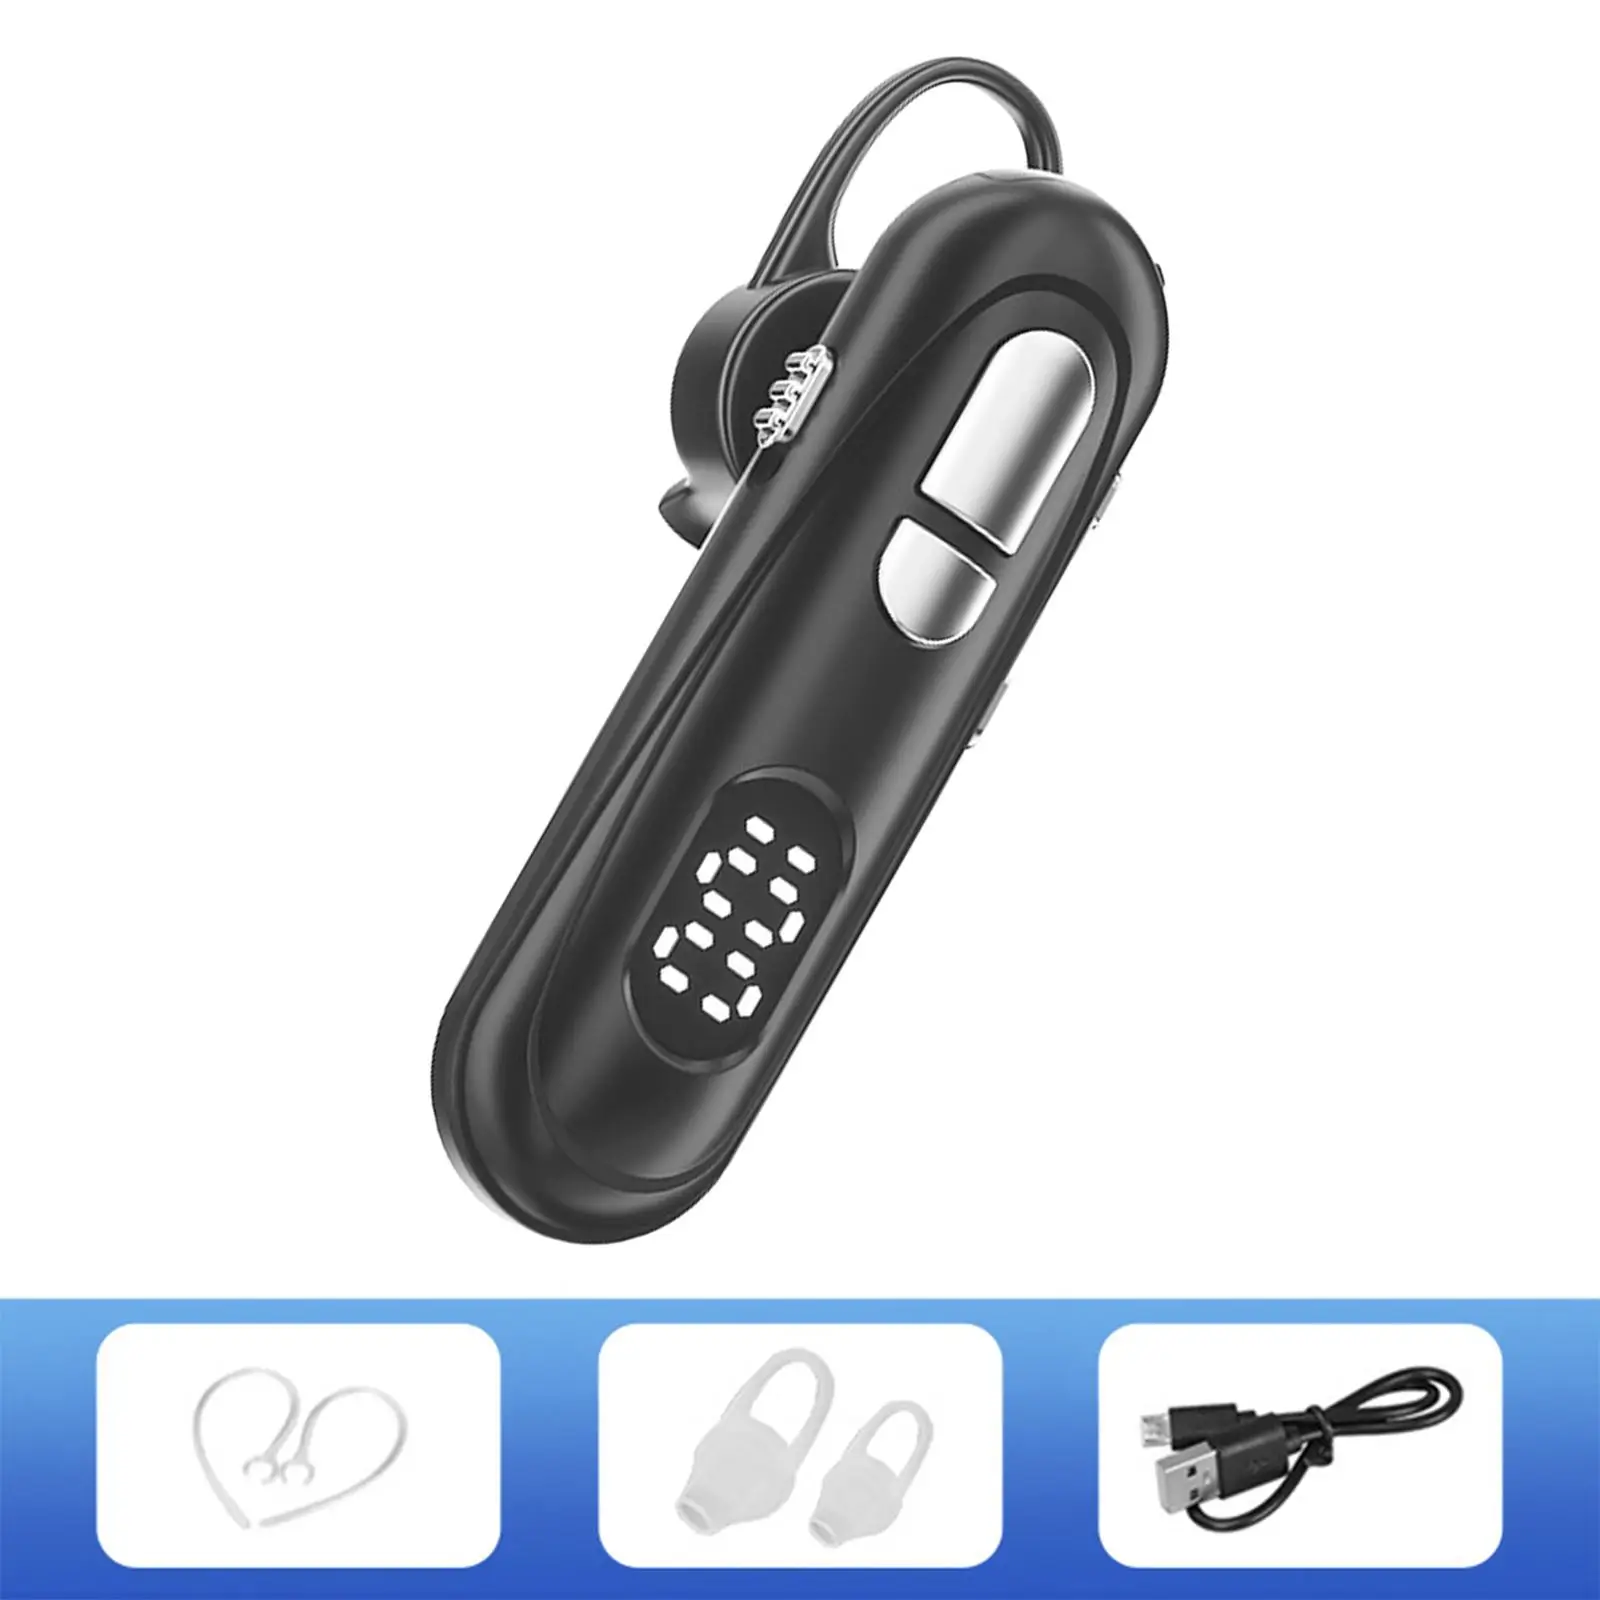 Wireless Bluetooth Earphone V5.1 Multifunctional Digital Capacity Display Handsfree Noise Cancelling Earbuds Earpiece for Office